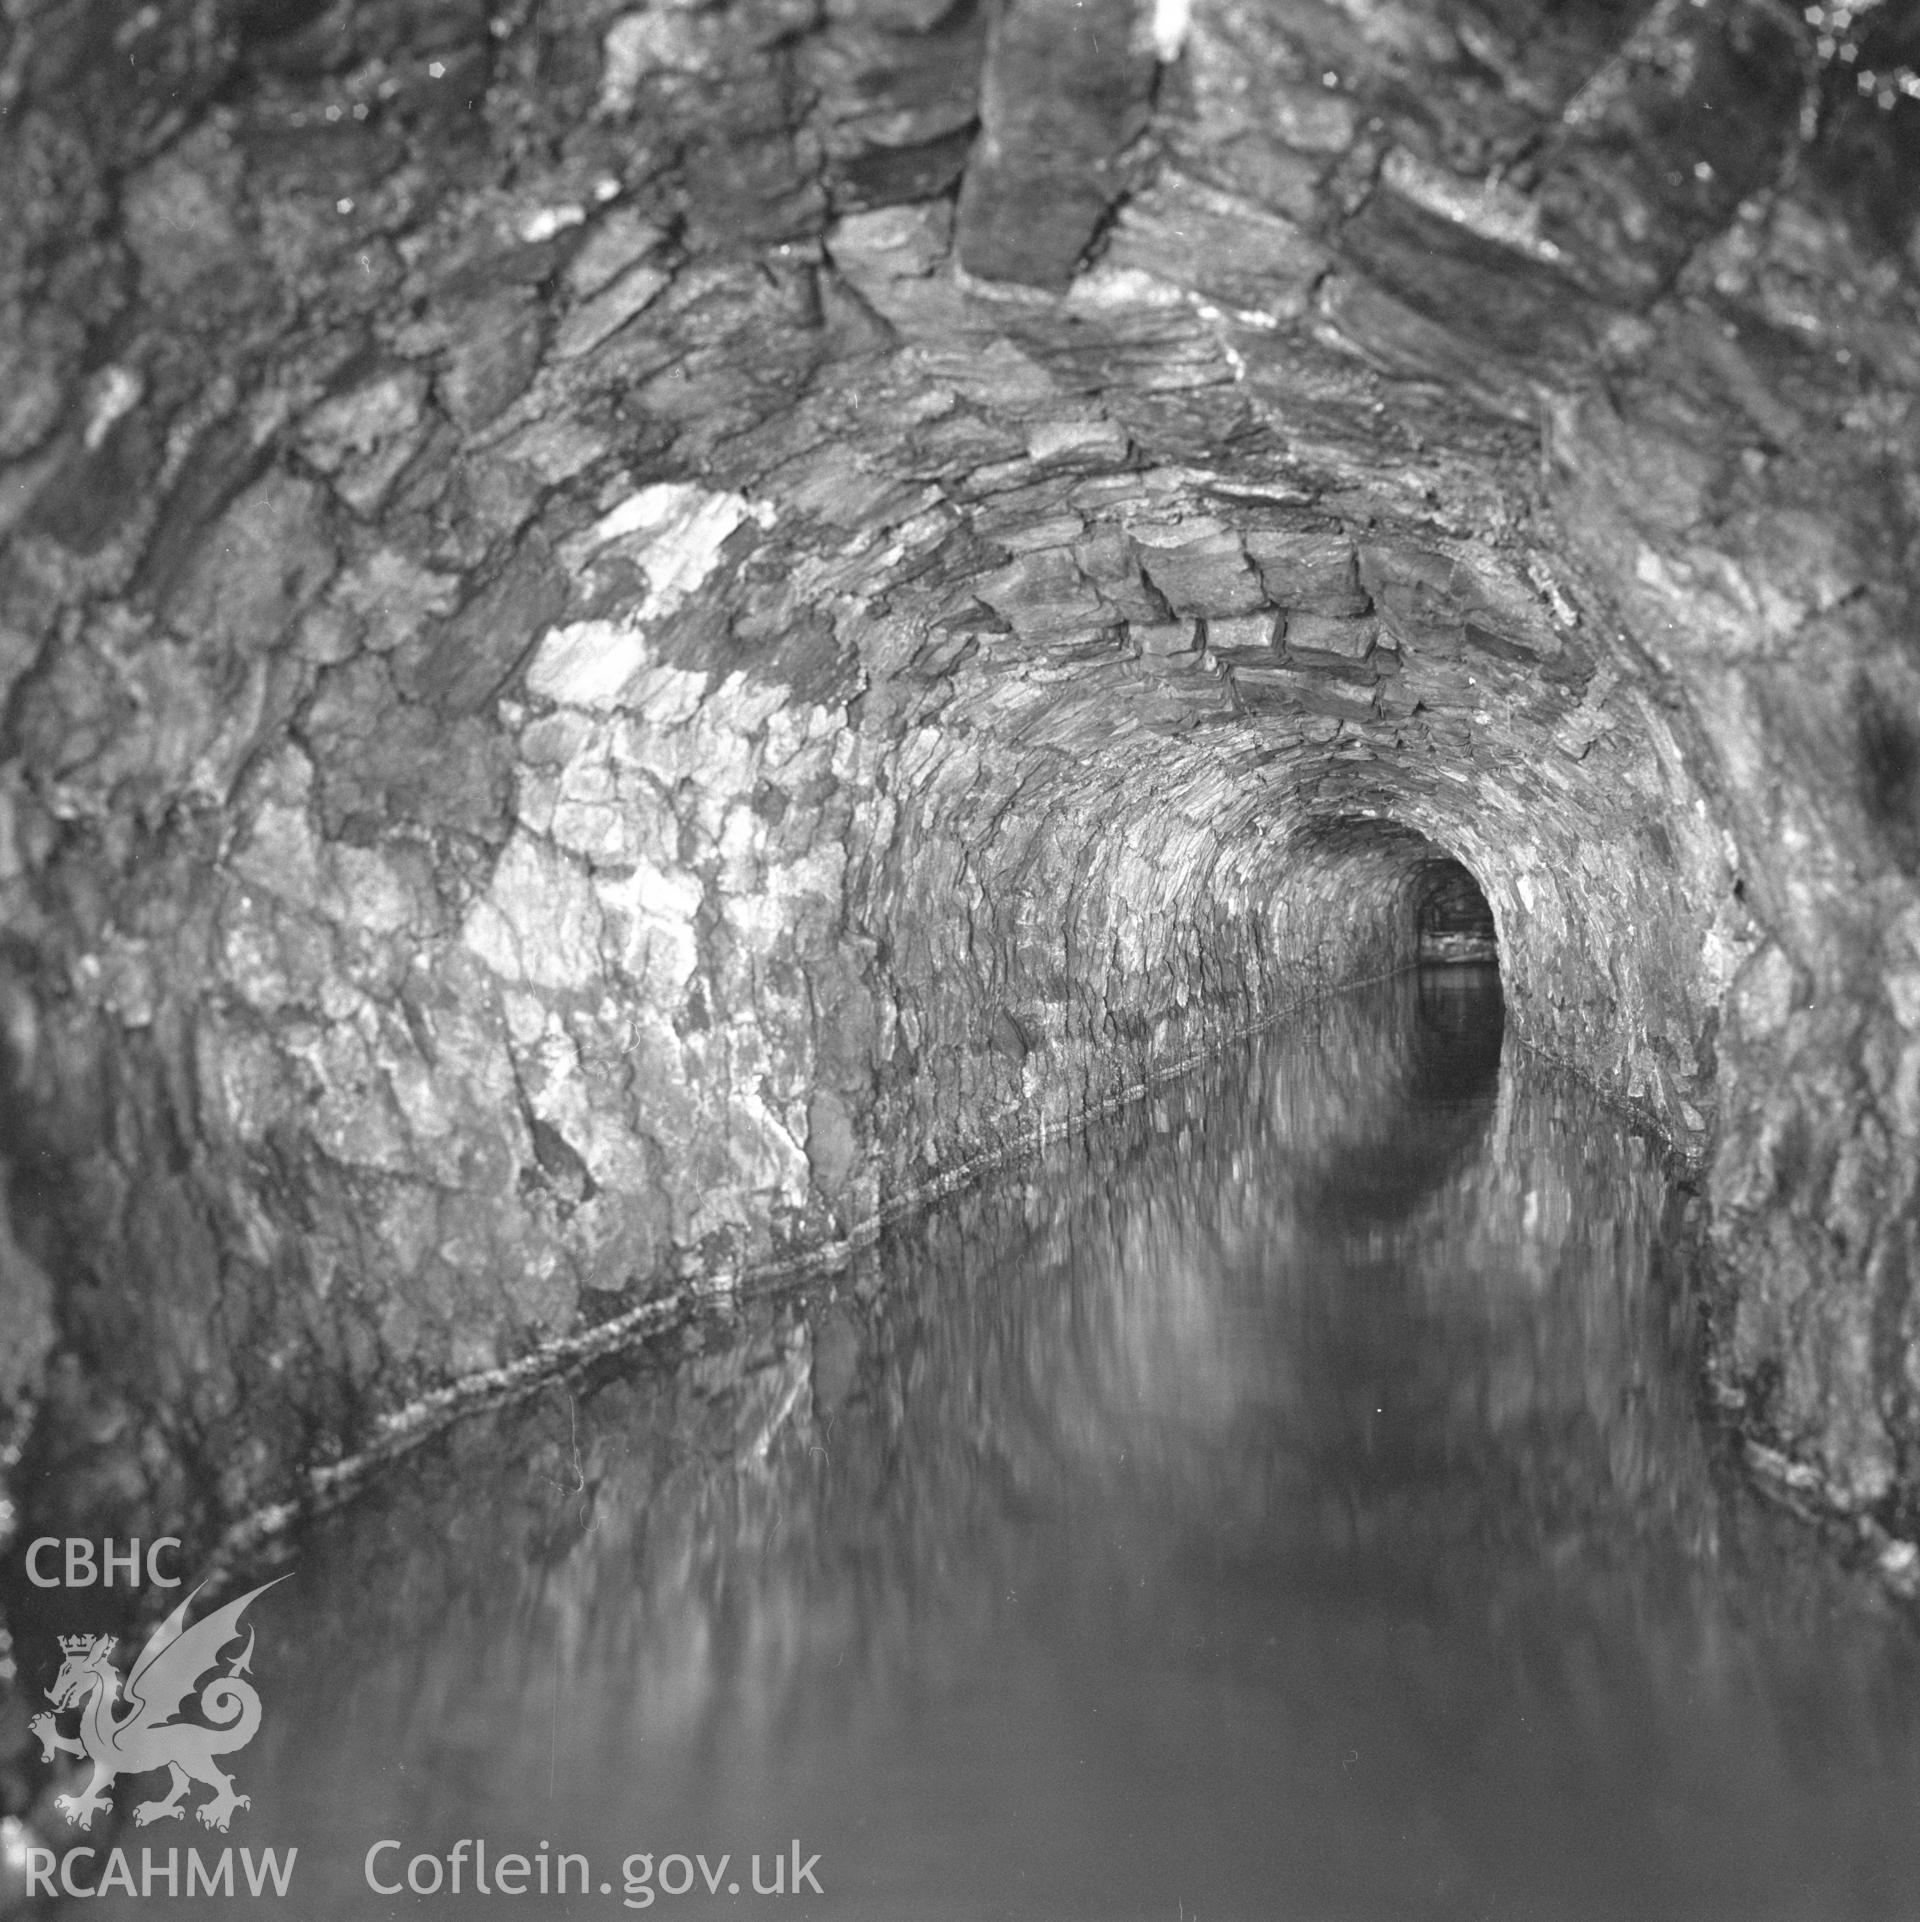 Digital copy of an acetate negative showing interior of Wood's Level at Big Pit, from the John Cornwell Collection.